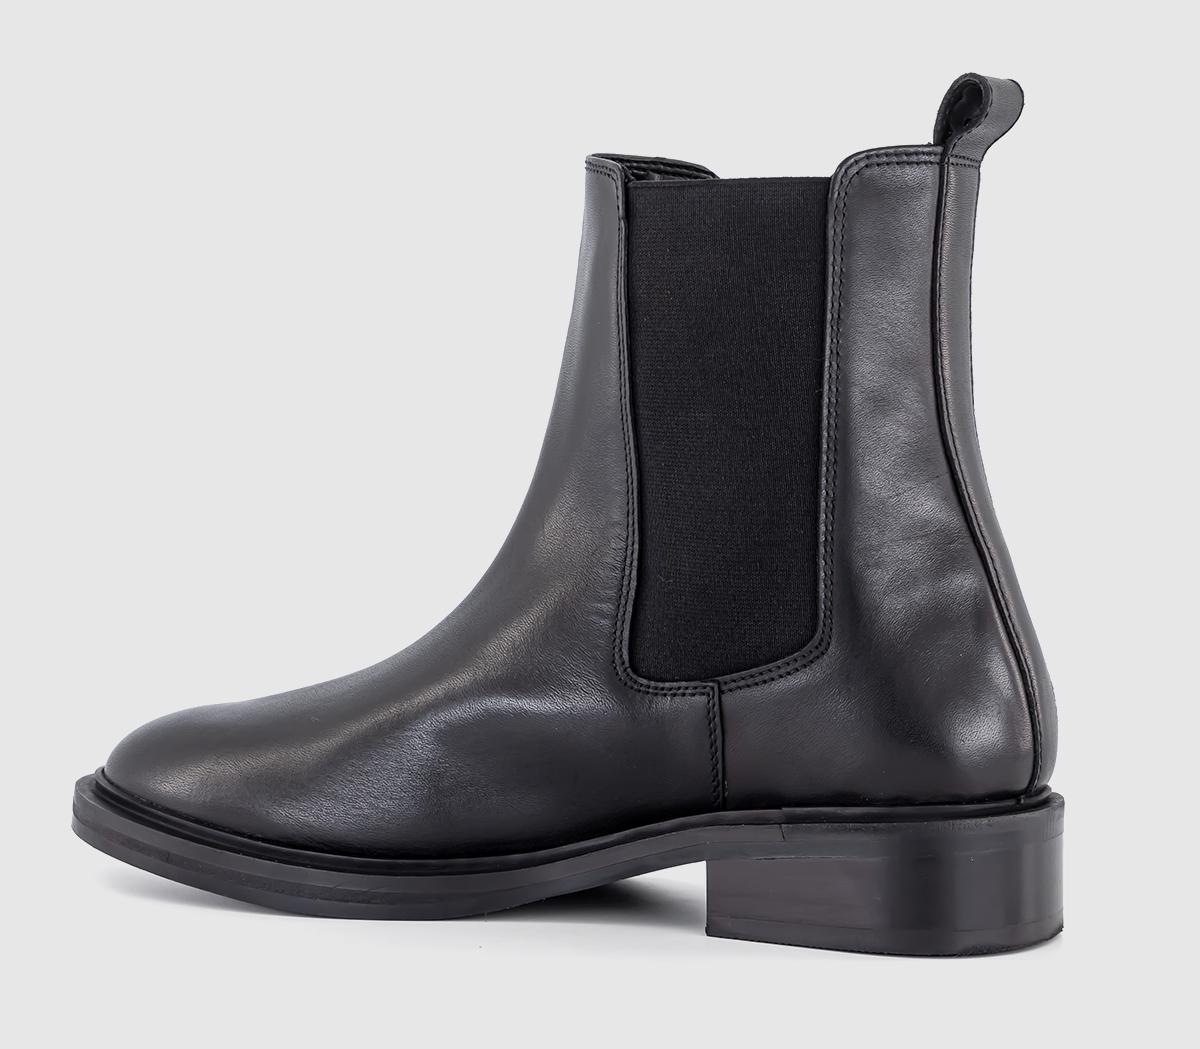 OFFICE Astro Clean Sole Chelsea Boots Black Leather - Women's Ankle Boots